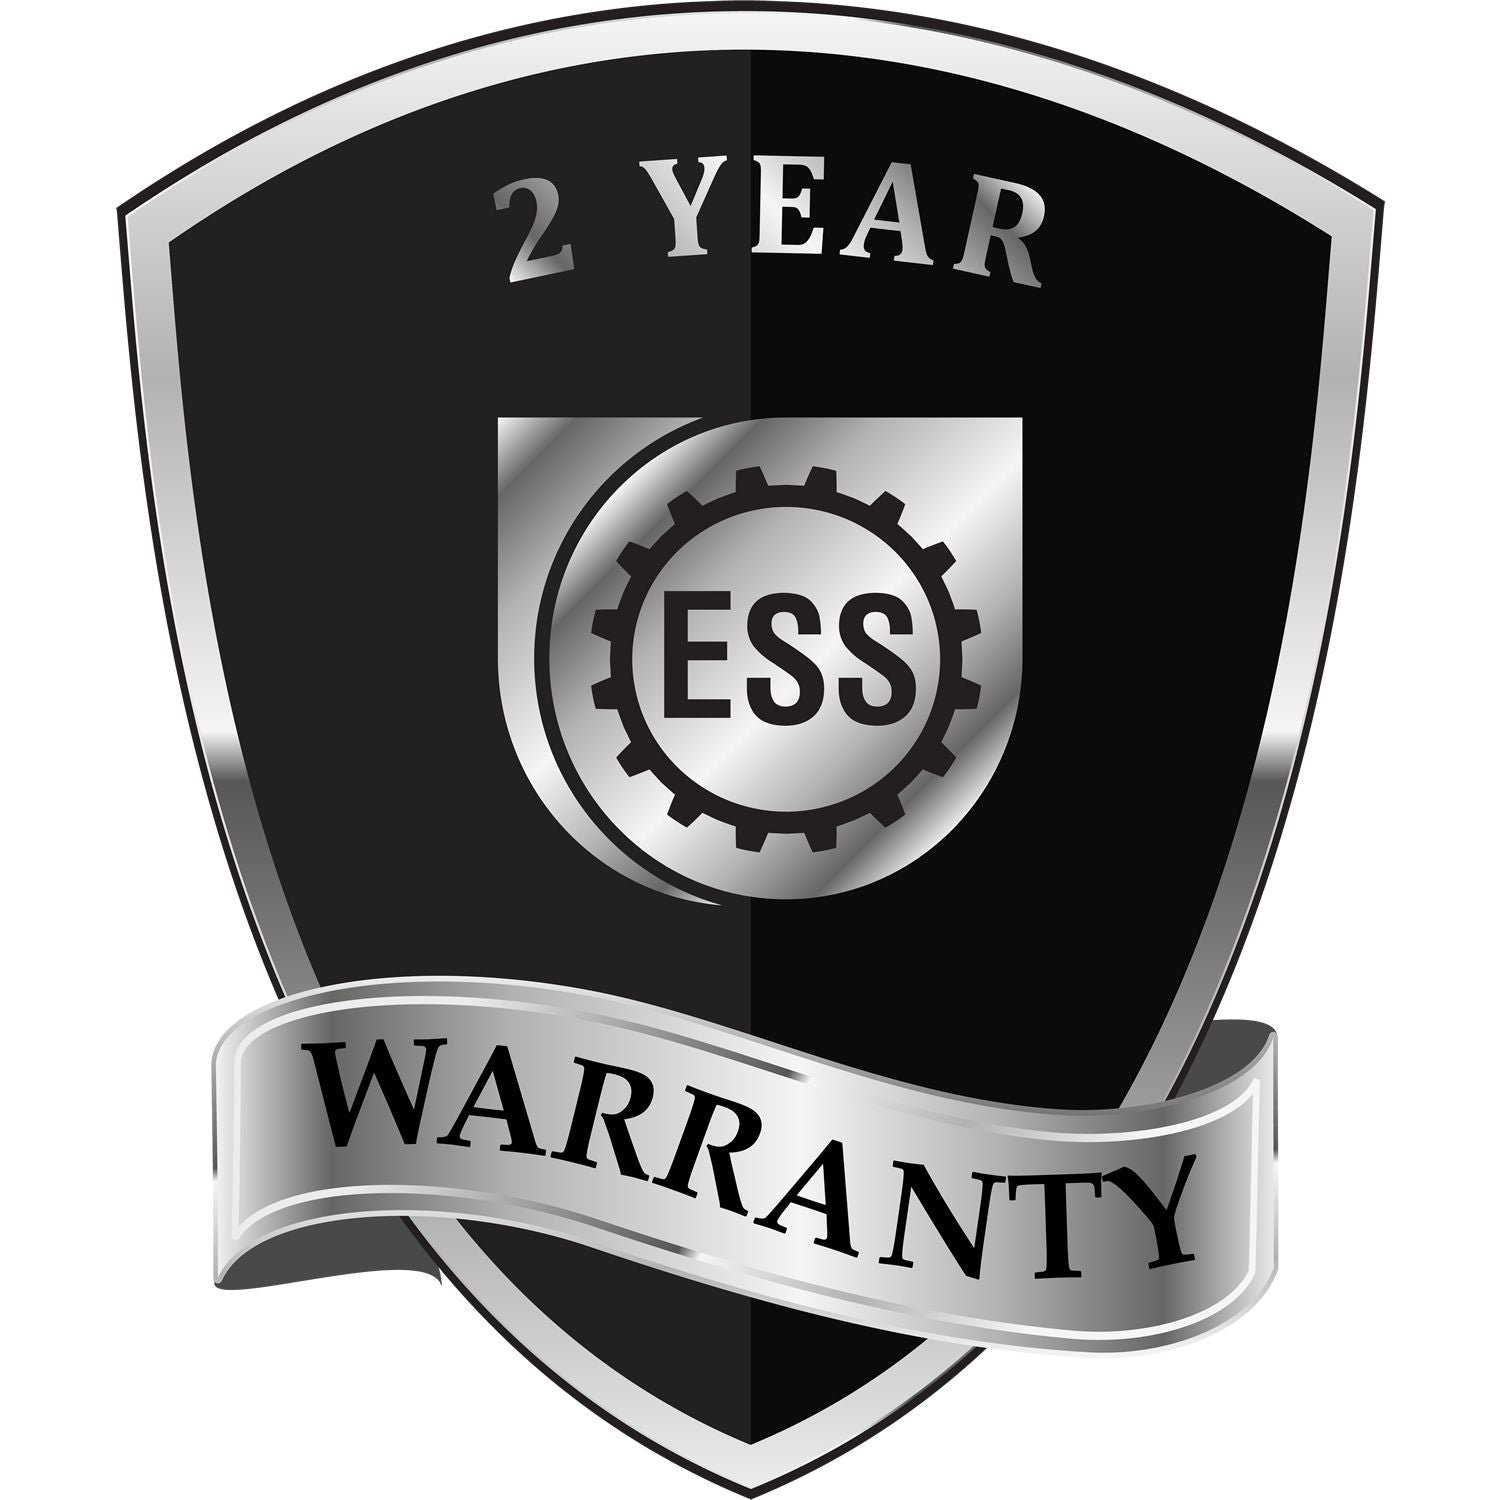 A badge or emblem showing a warranty icon for the Handheld Virginia Land Surveyor Seal